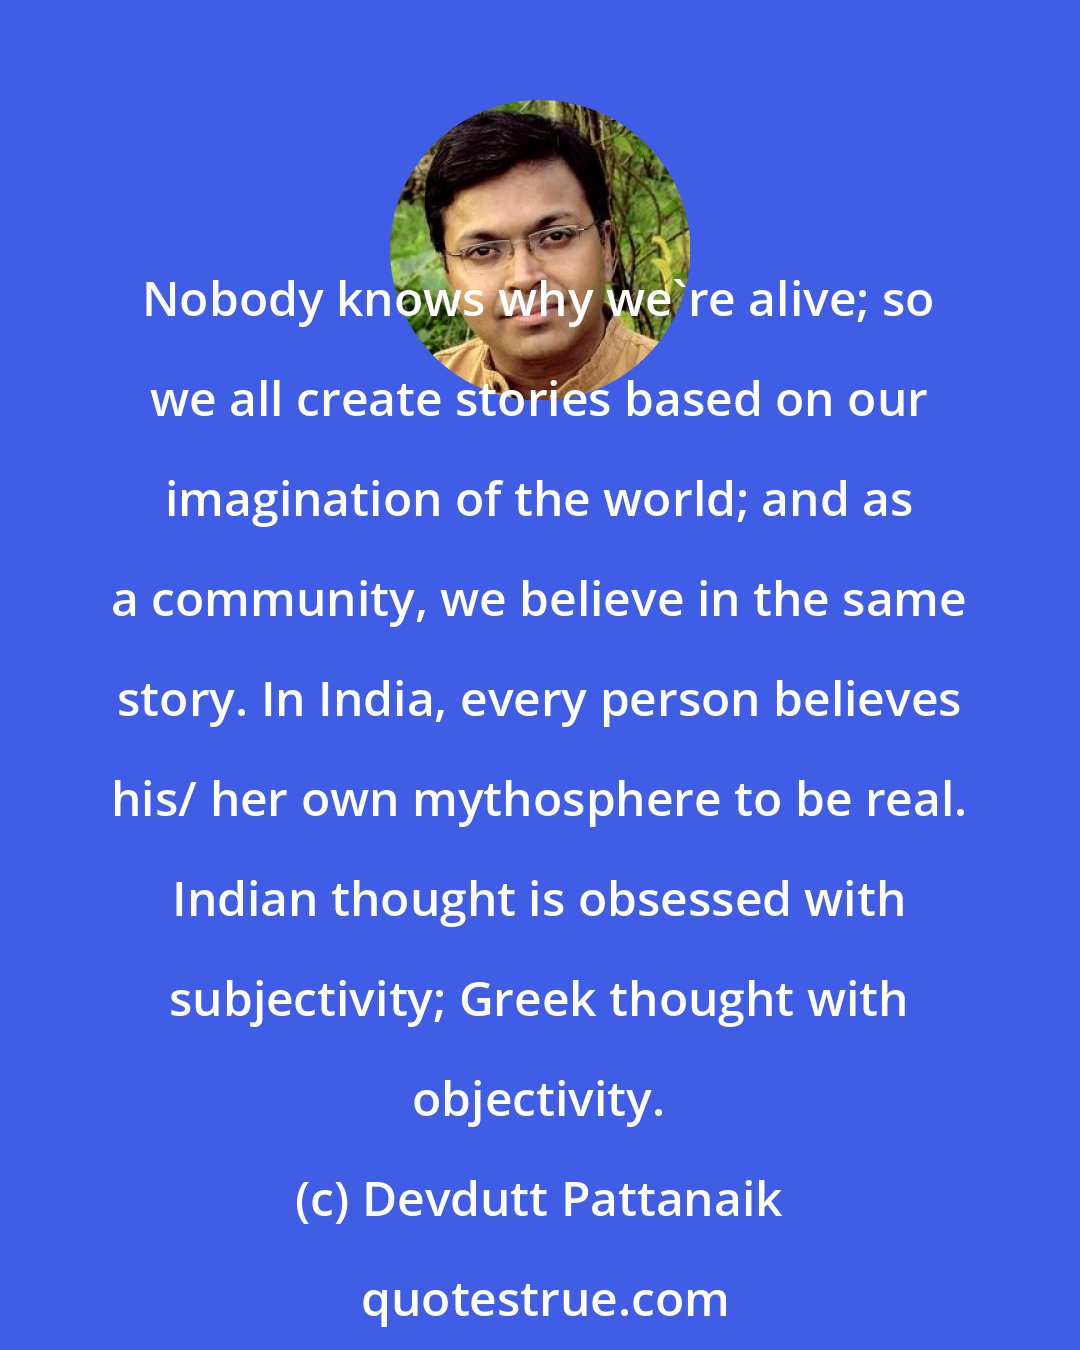 Devdutt Pattanaik: Nobody knows why we're alive; so we all create stories based on our imagination of the world; and as a community, we believe in the same story. In India, every person believes his/ her own mythosphere to be real. Indian thought is obsessed with subjectivity; Greek thought with objectivity.